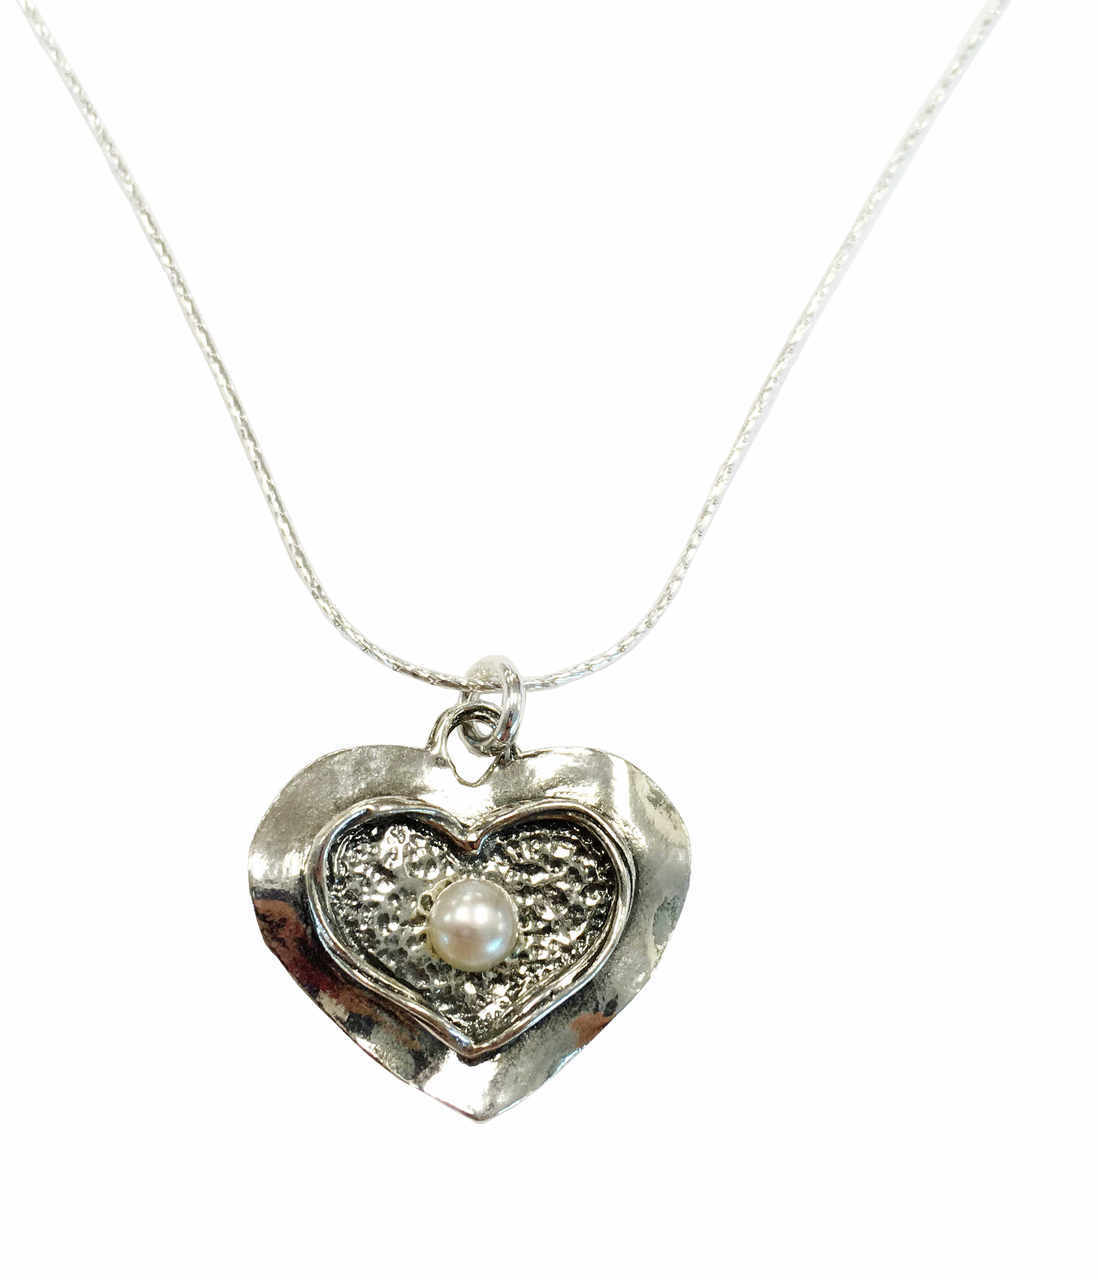 Silver Hammered Heart and Pearl Necklace - The Nancy Smillie Shop - Art, Jewellery & Designer Gifts Glasgow